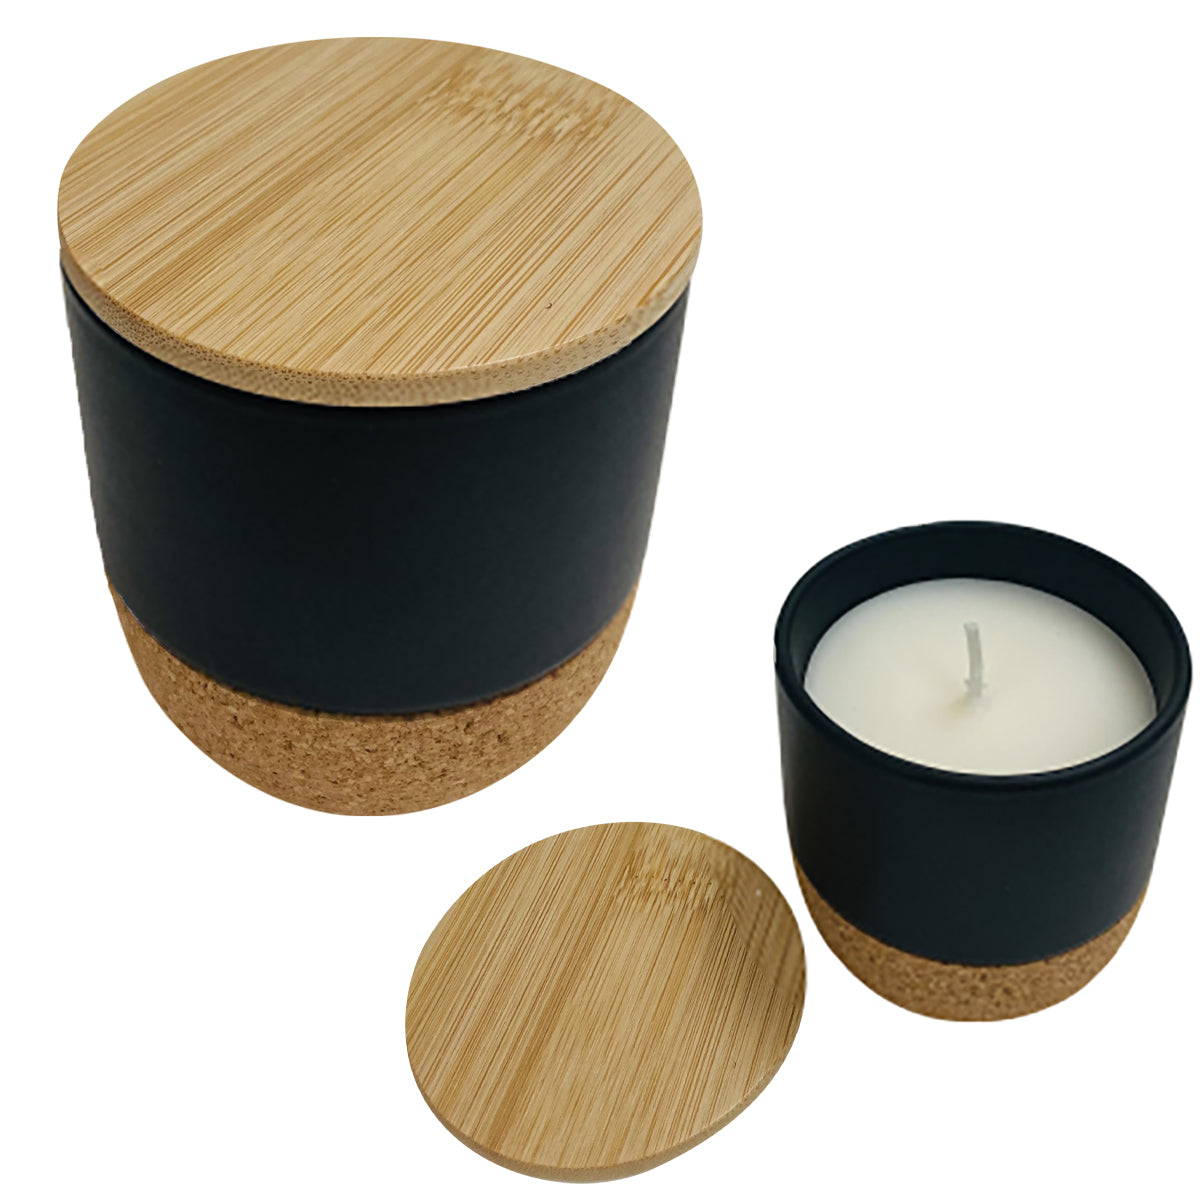 Santal Soy Wax Candle - Vanilla Scent in black